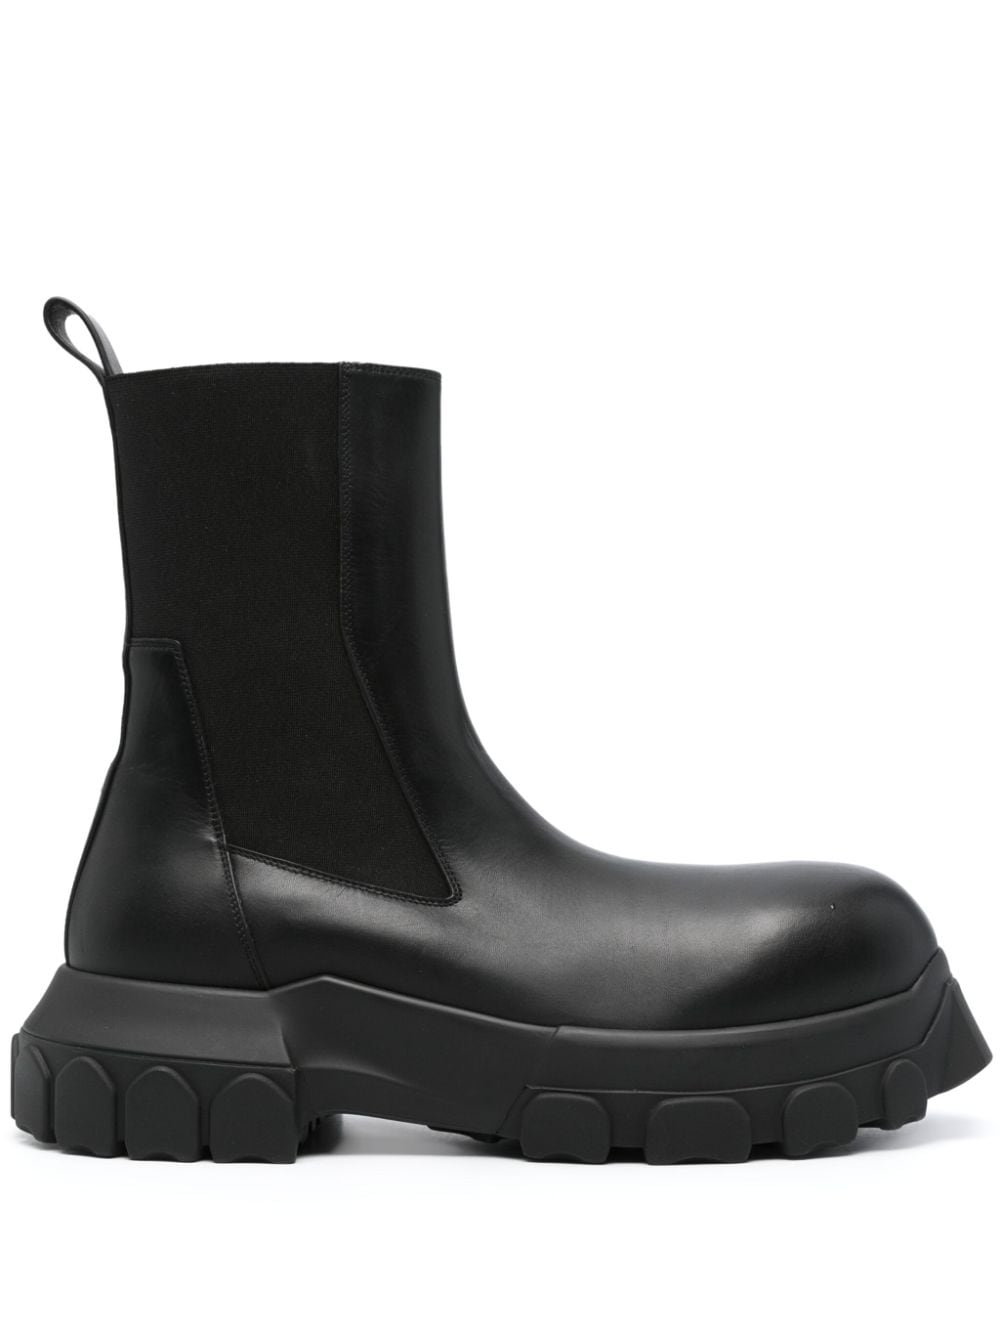 Image 1 of Rick Owens Lido Beatle Bozo Tractor boots